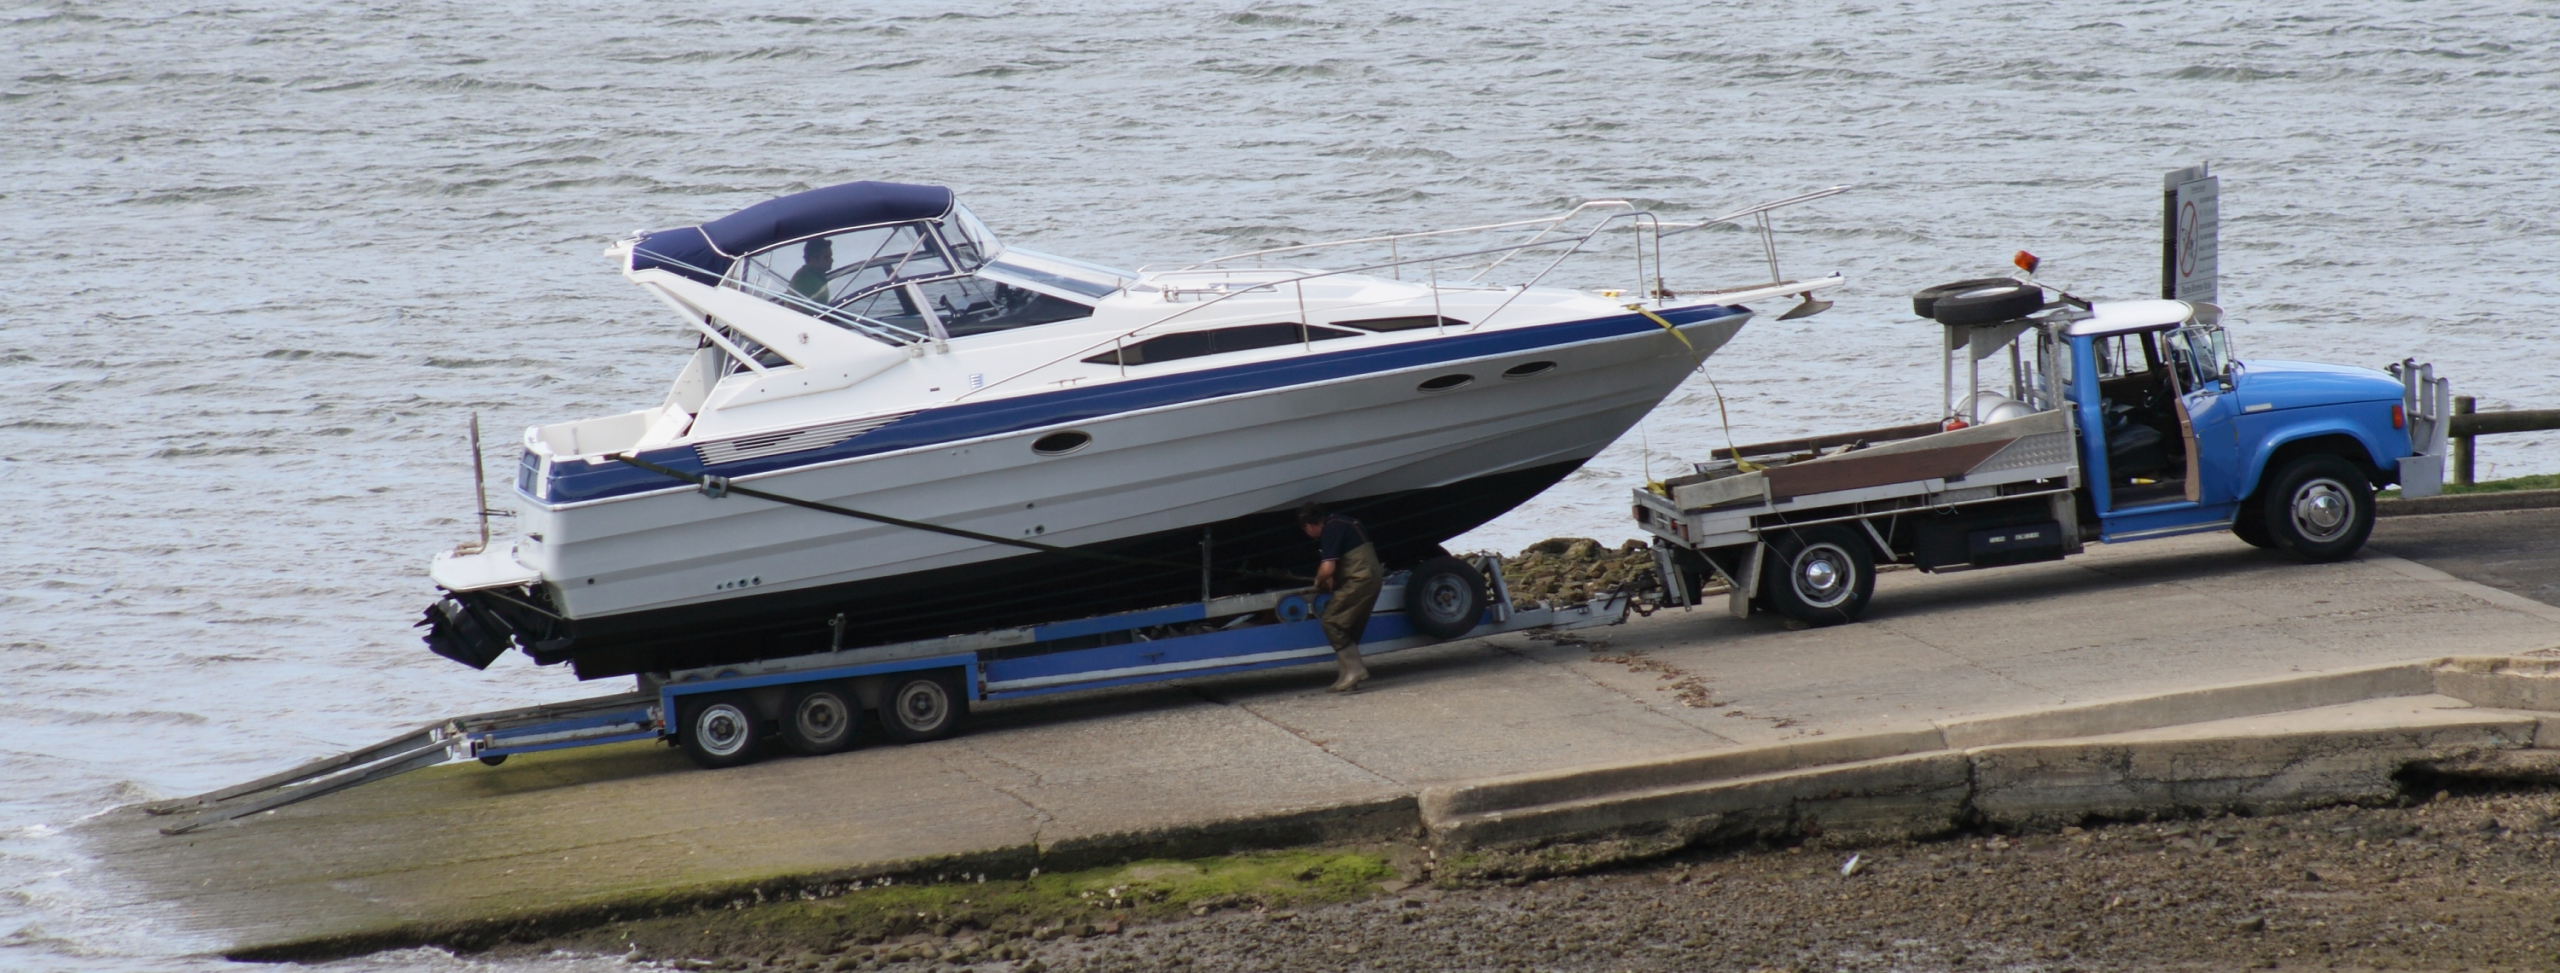 Boat transportation carrier on a dock with motor boat